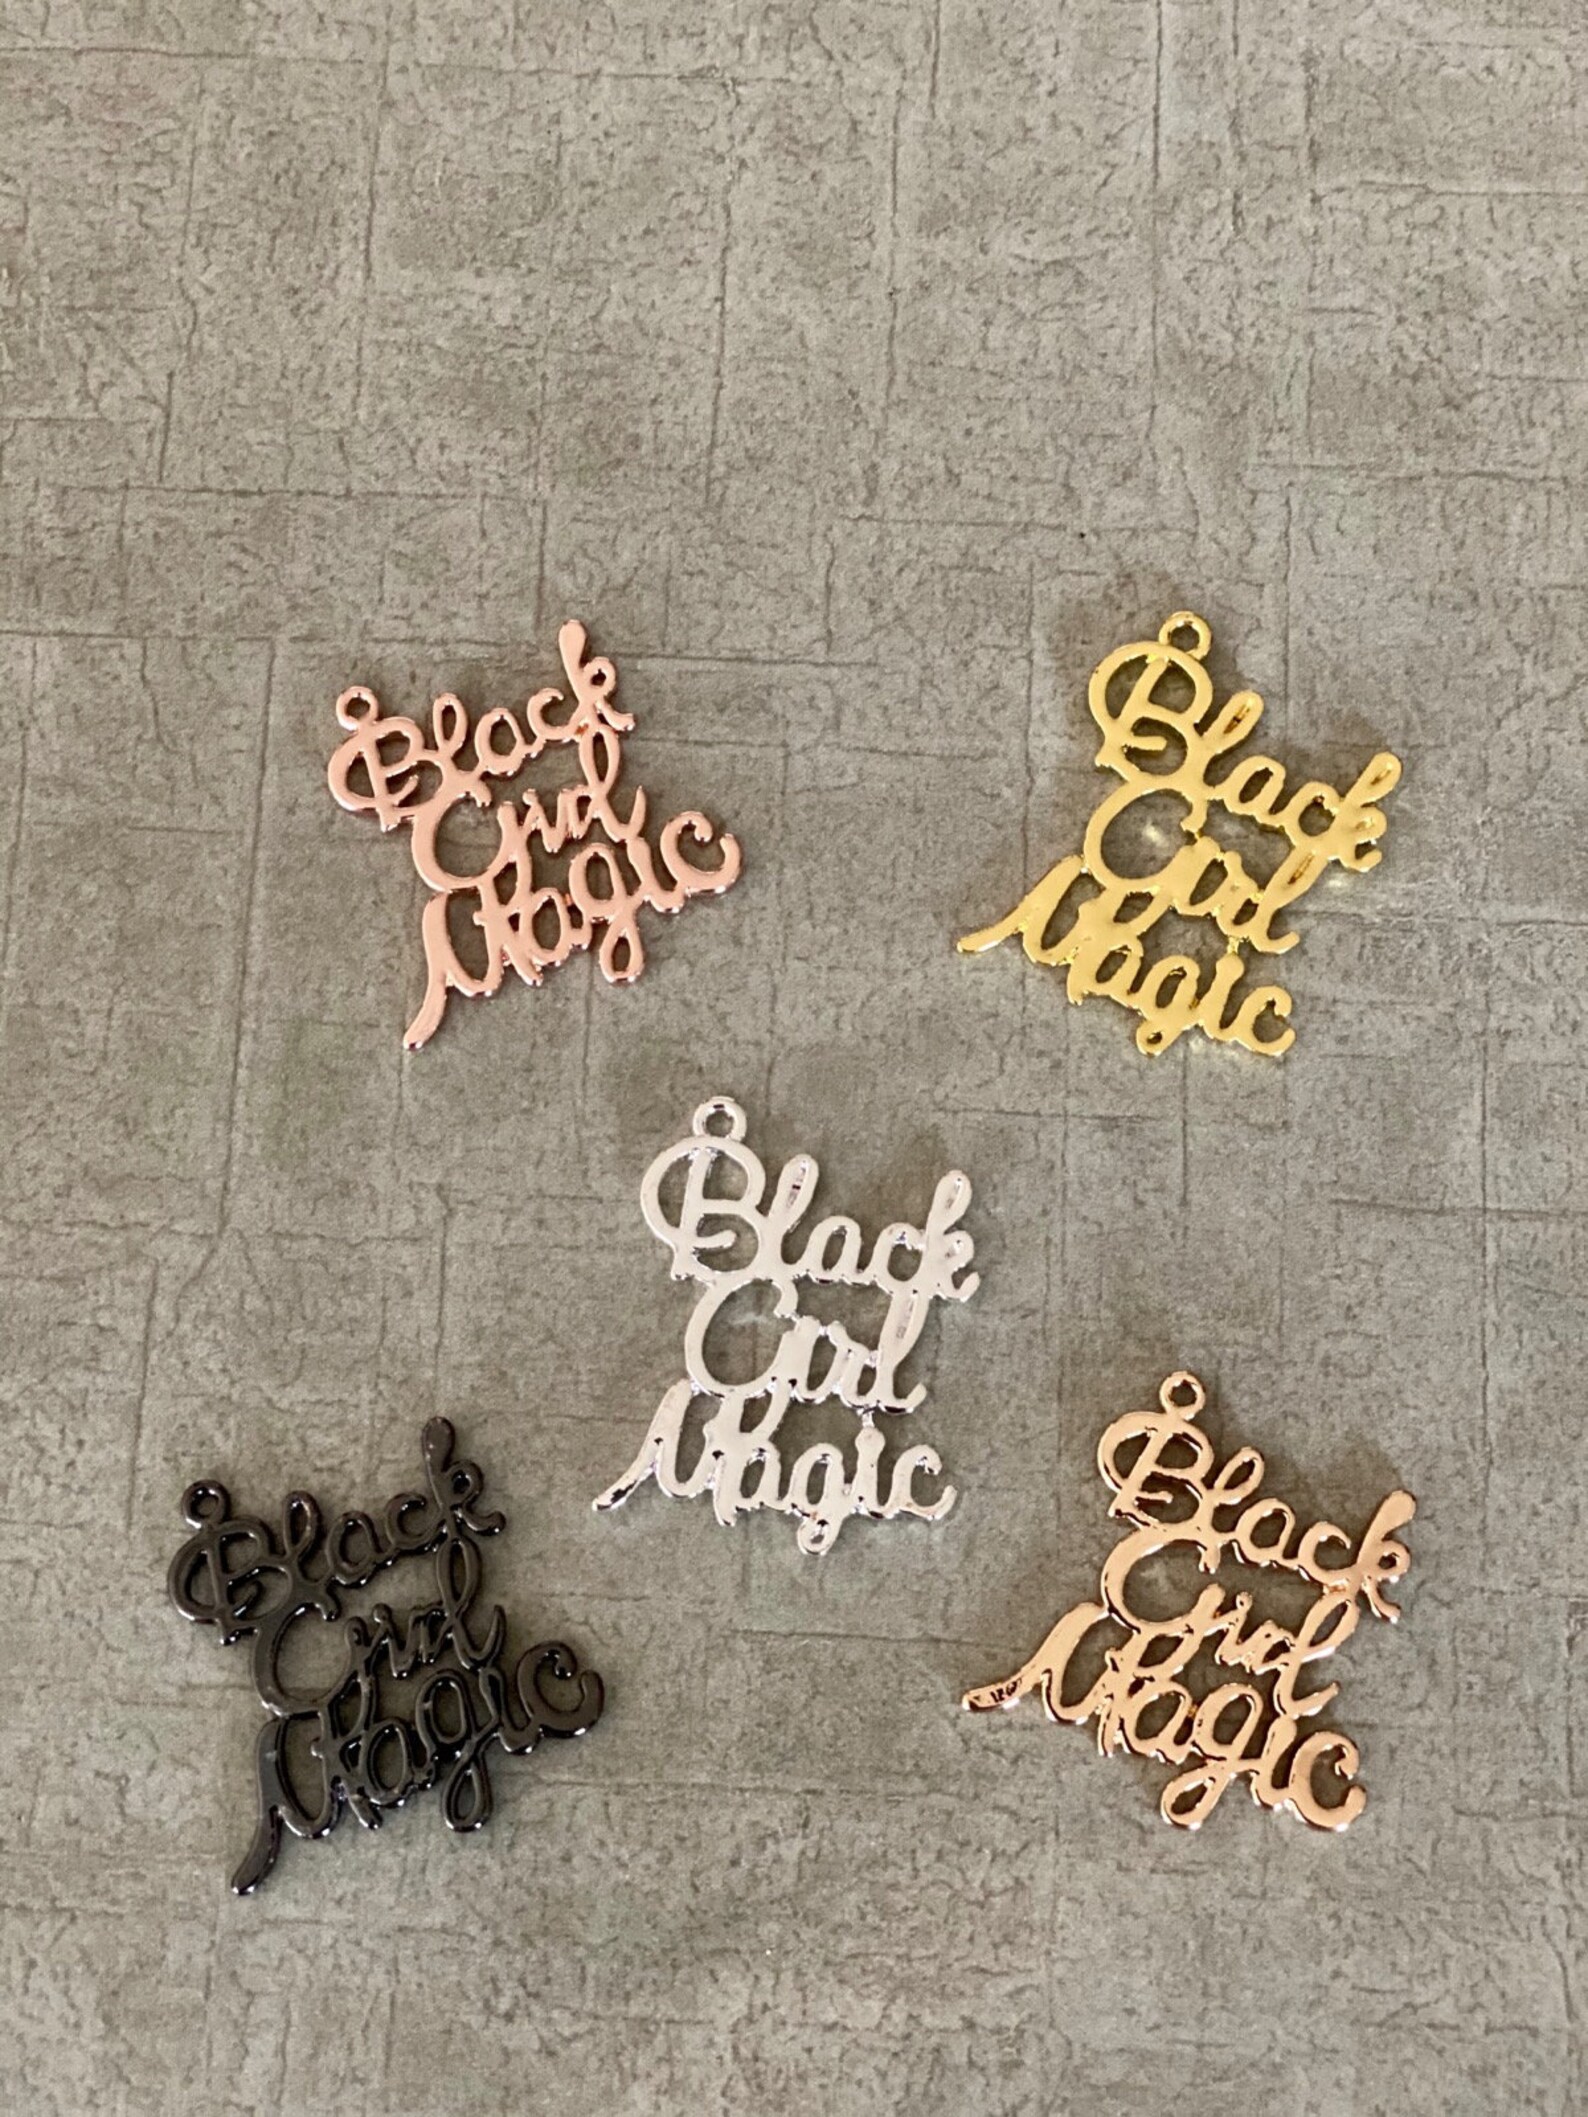 Black Girl Magic Charms Wholesale Charms Bling Charms - Etsy